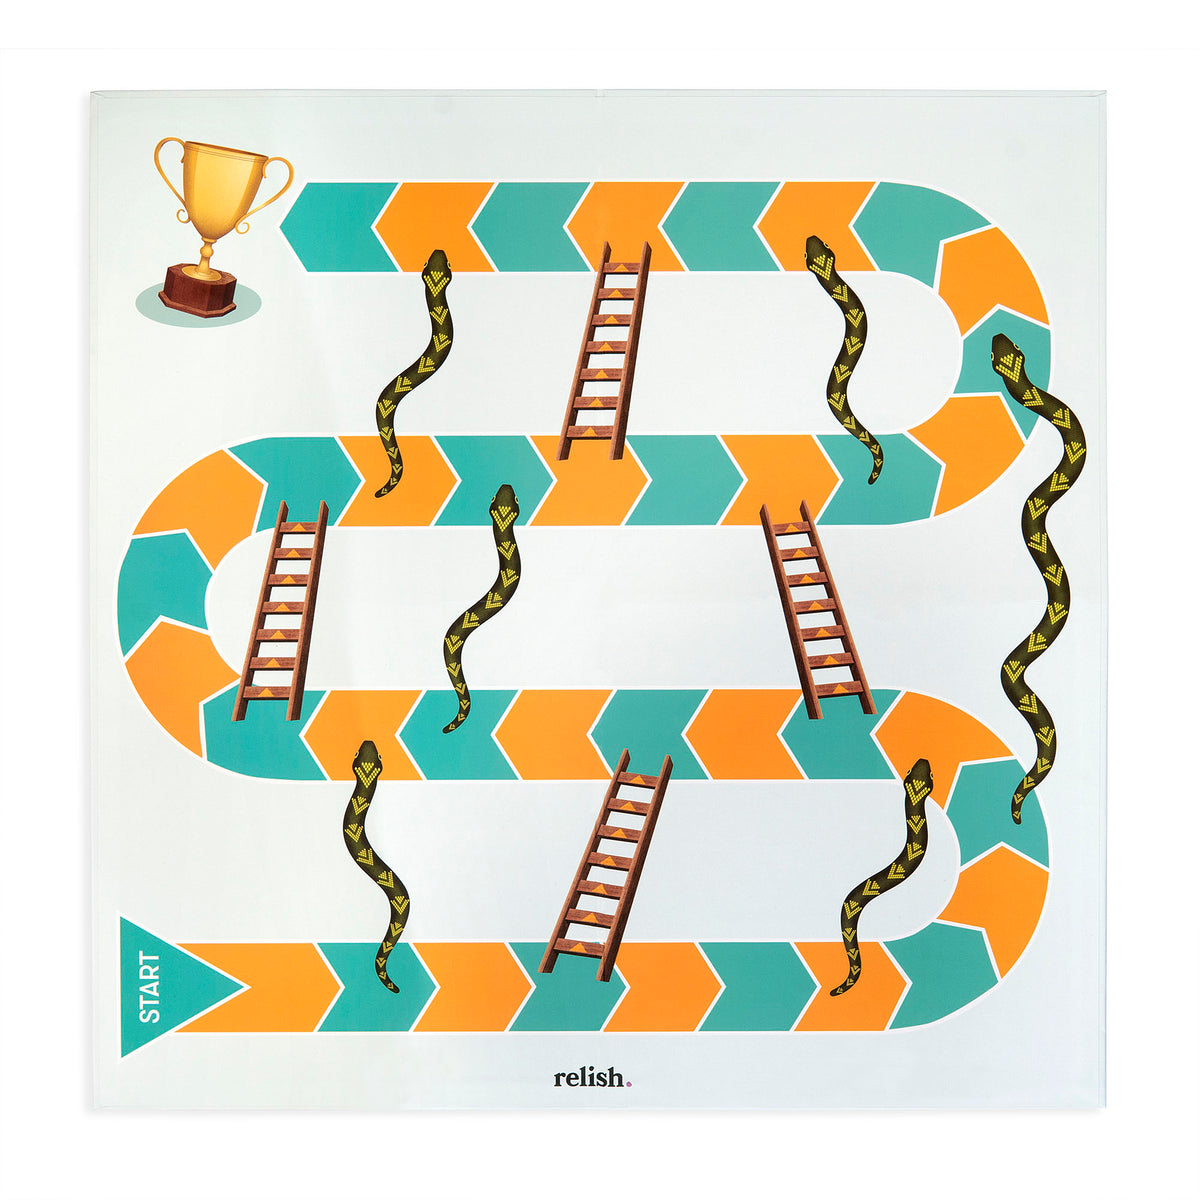 Snakes ladders and ludo